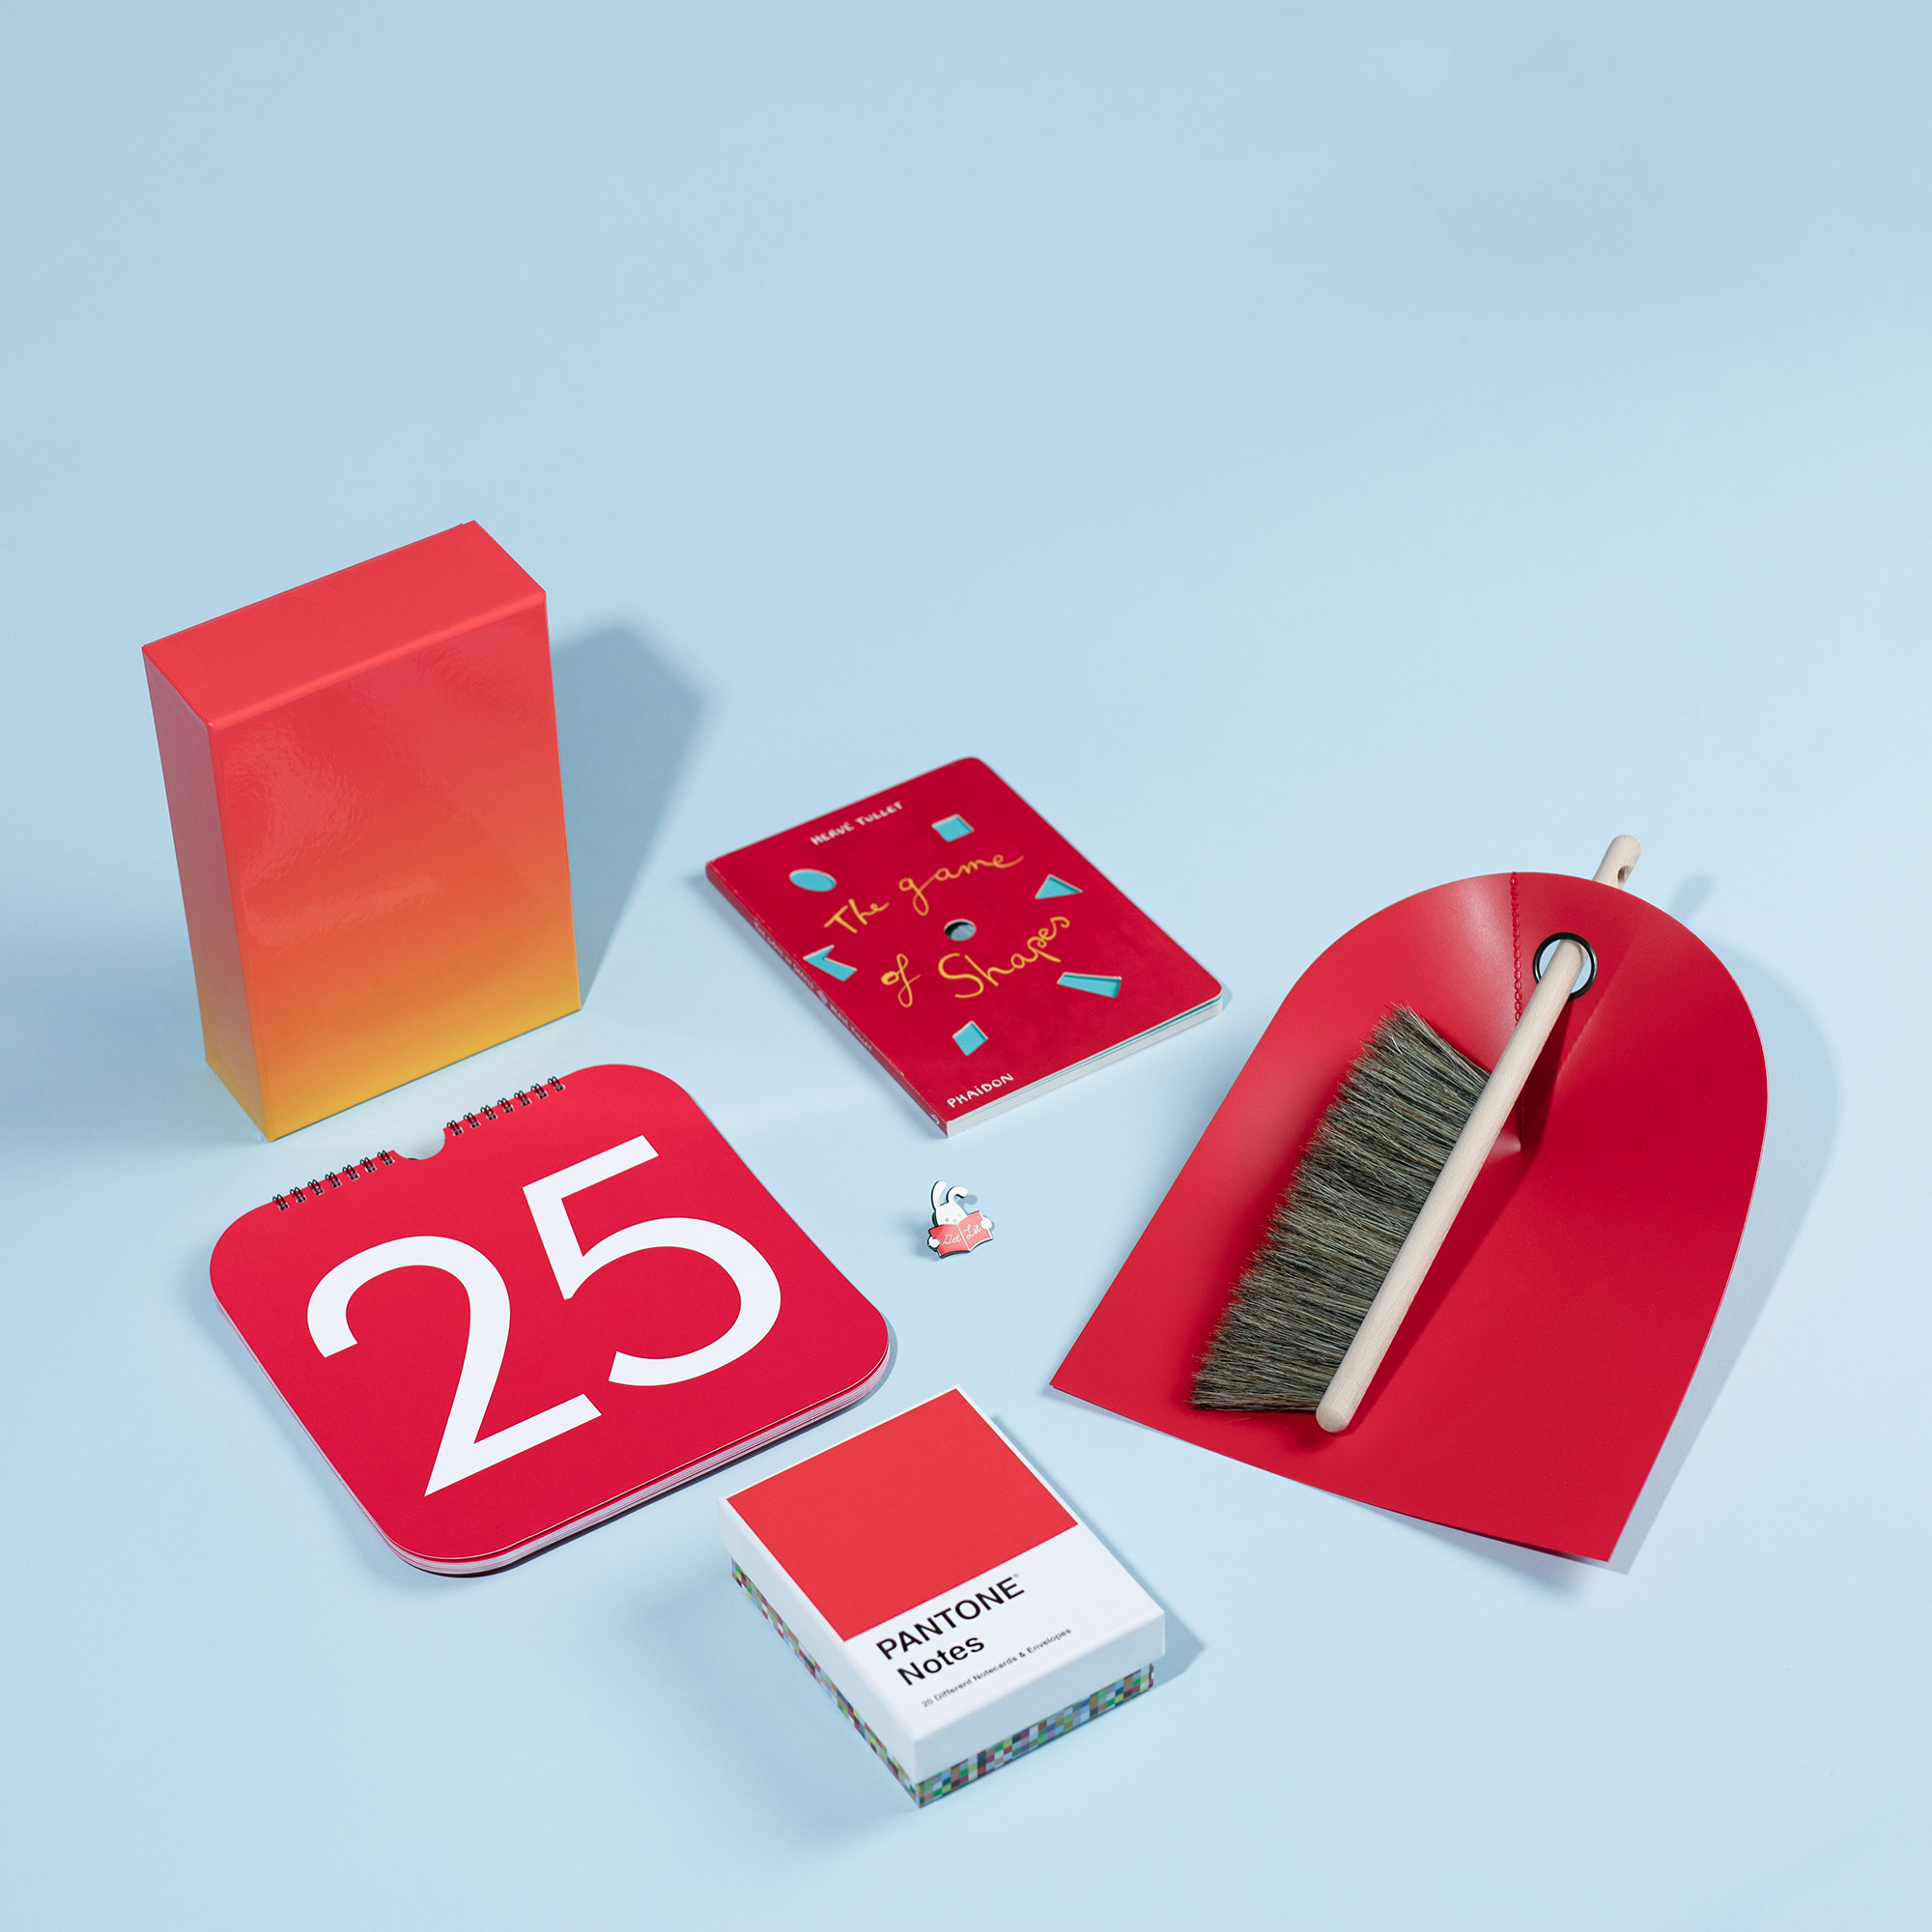 A calendar, notecards, and a broom and dustpan, all red on a blue background